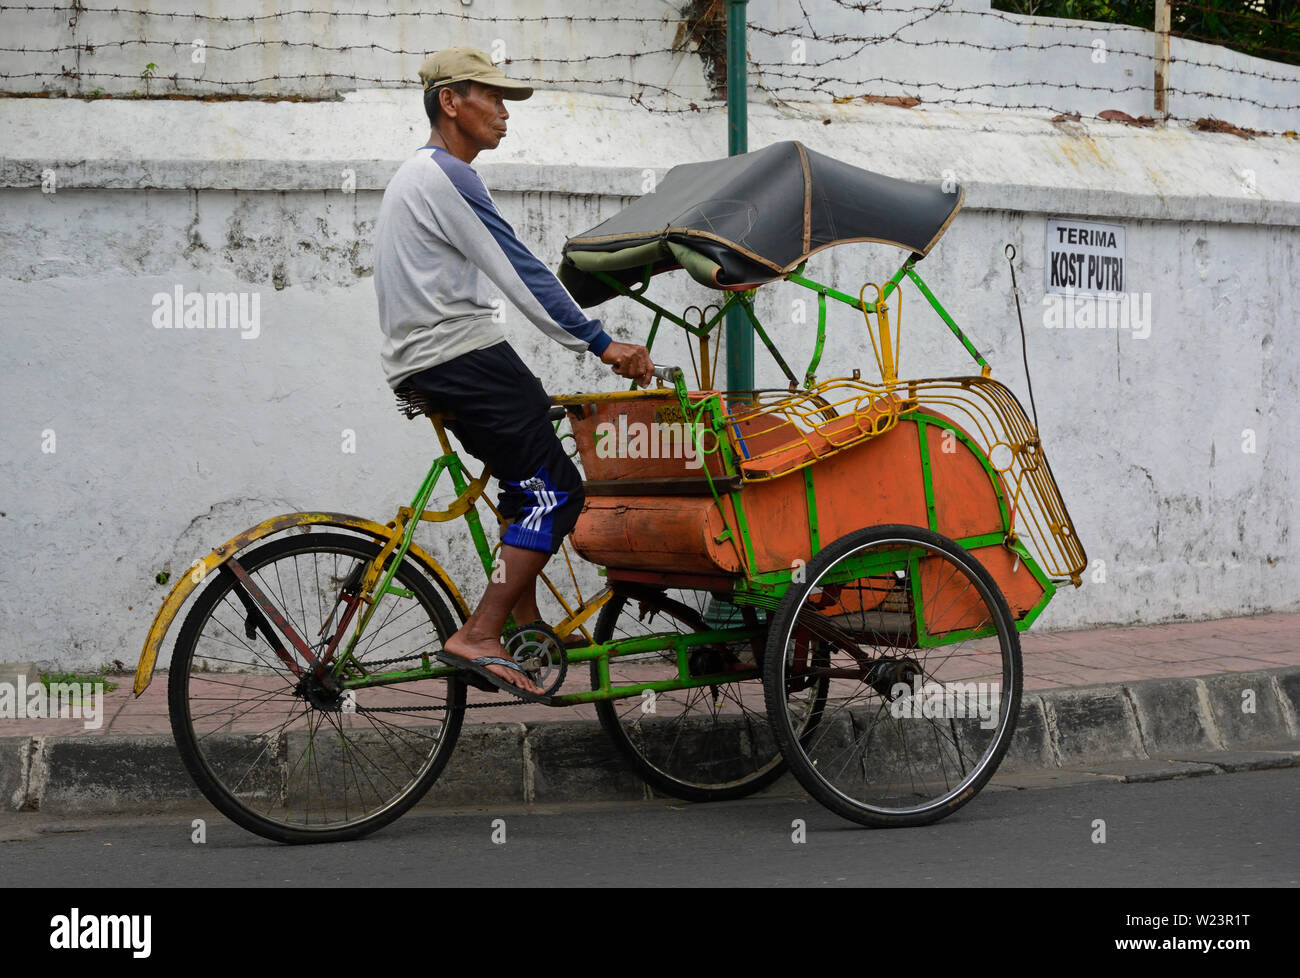 yogyakarta, di yogyakarta/indonesia - november 10, 2015: a becak driver on his vehicle on a road in yogyakarta looking out for clients Stock Photo